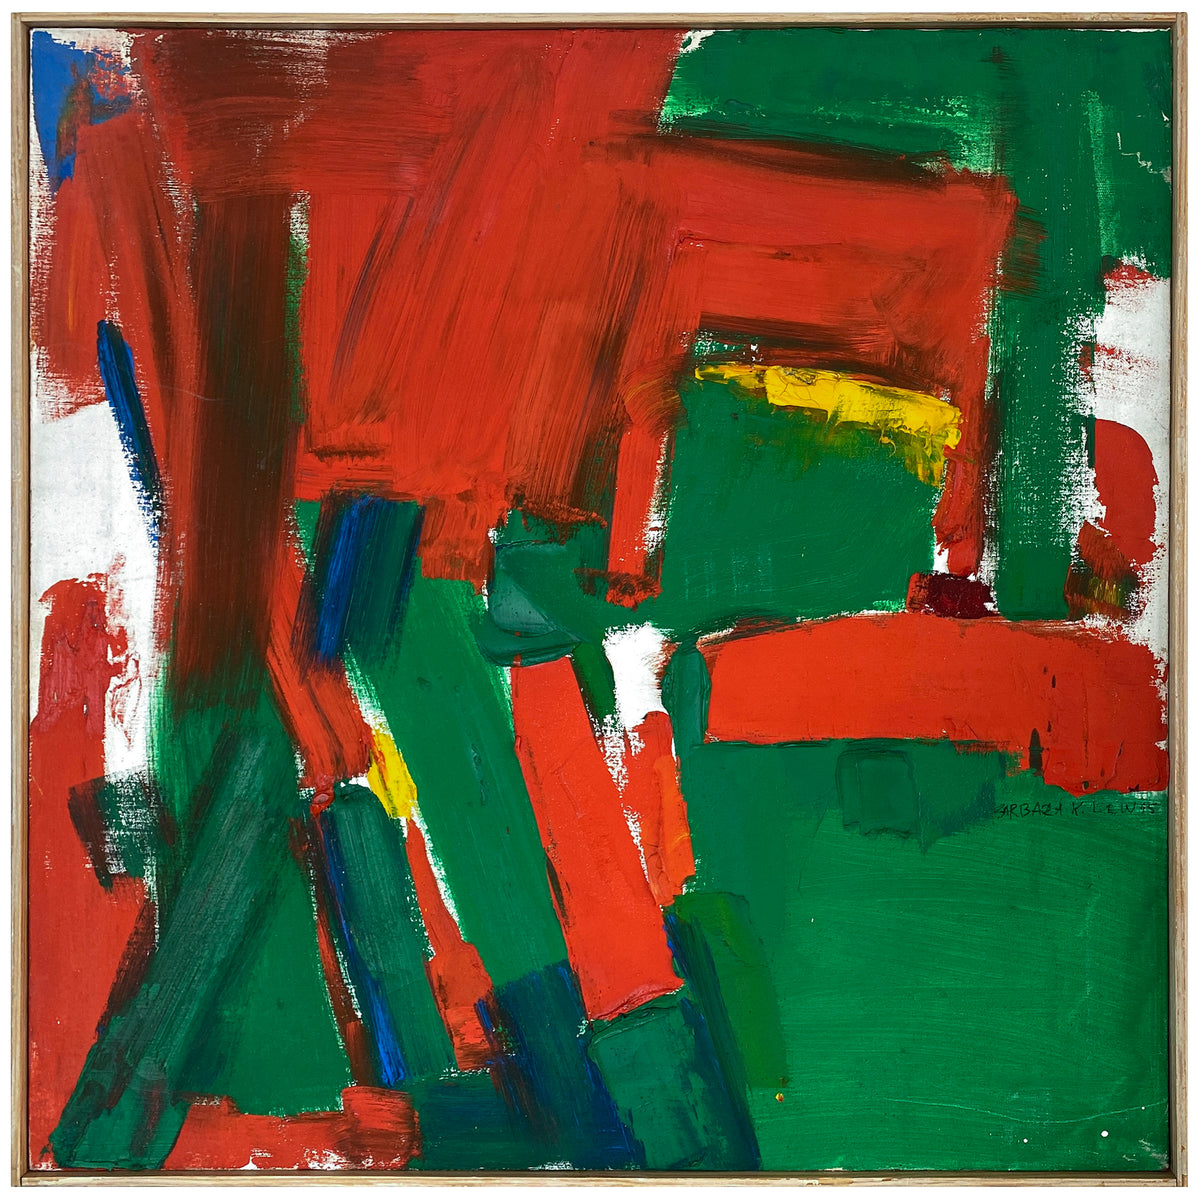 &lt;i&gt;Green and Red with Yellow and Blue&lt;/i&gt; &lt;br&gt;Mid Century Oil &lt;br&gt;&lt;br&gt;#Z0003